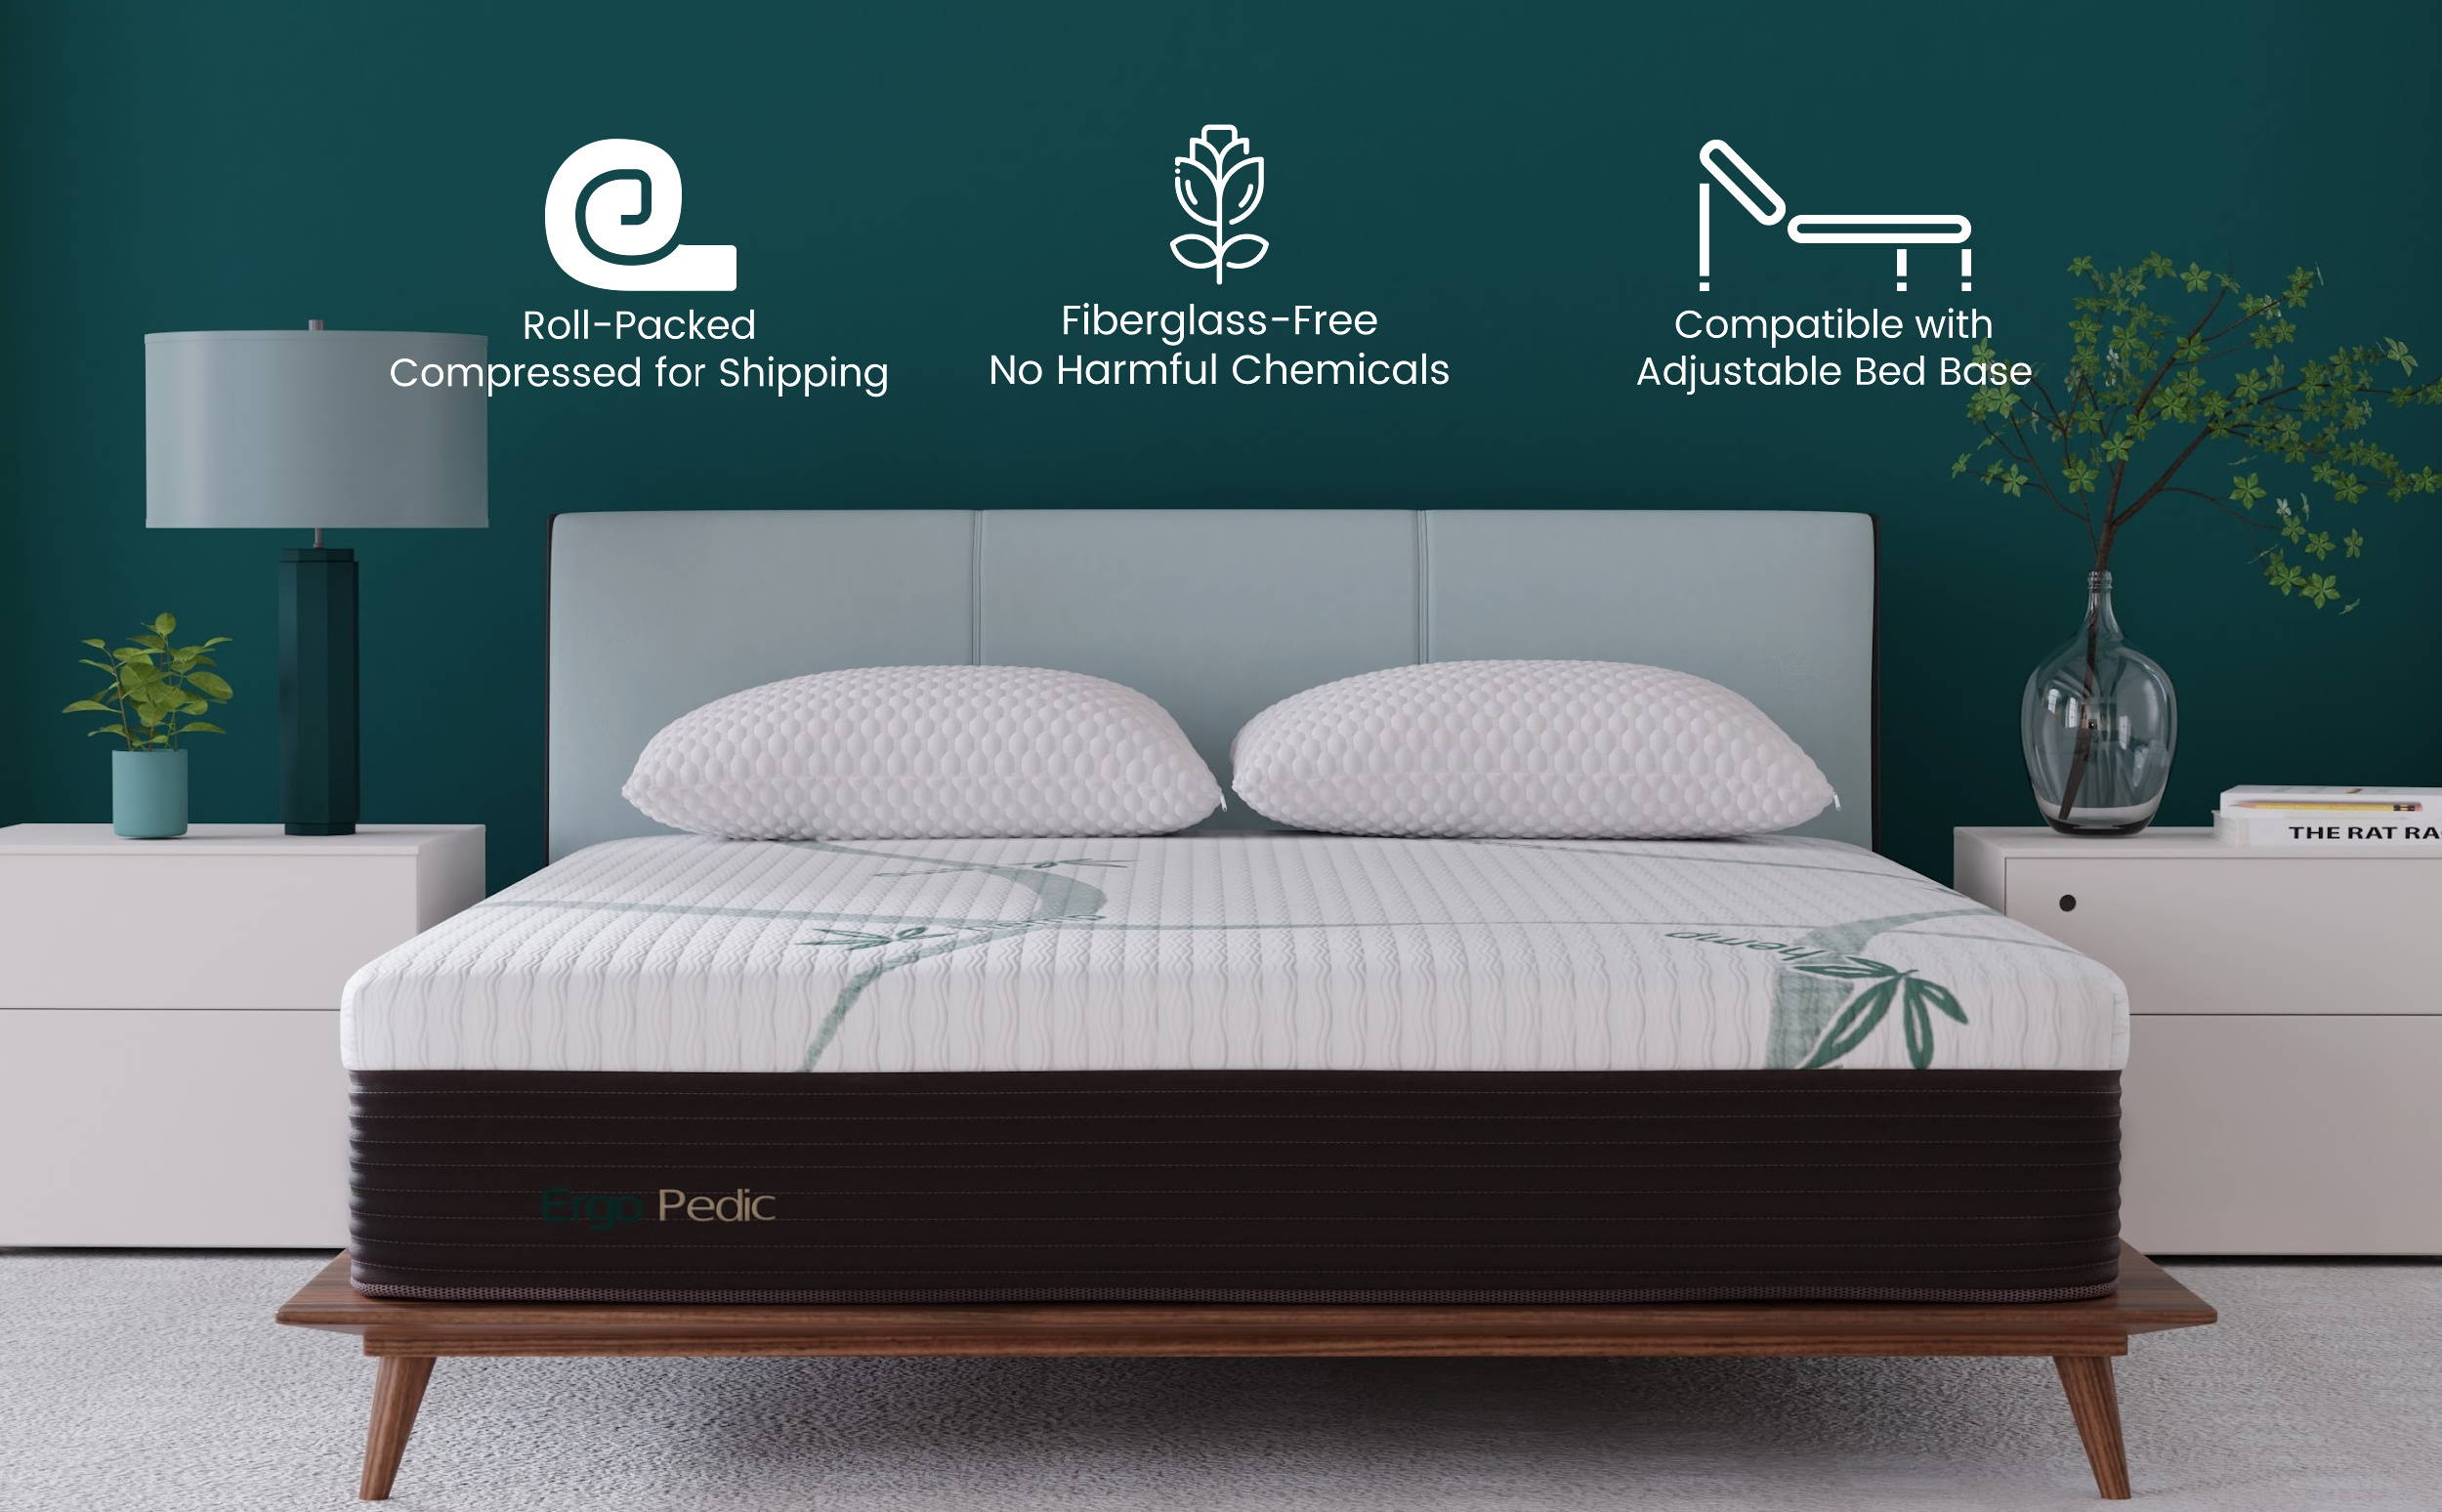 CBD Mattresses by Ergo-Pedic are roll-packed and compressed for shipping, fiberglass-free with no harmful chemicals, and are compatible with adjustable bases.